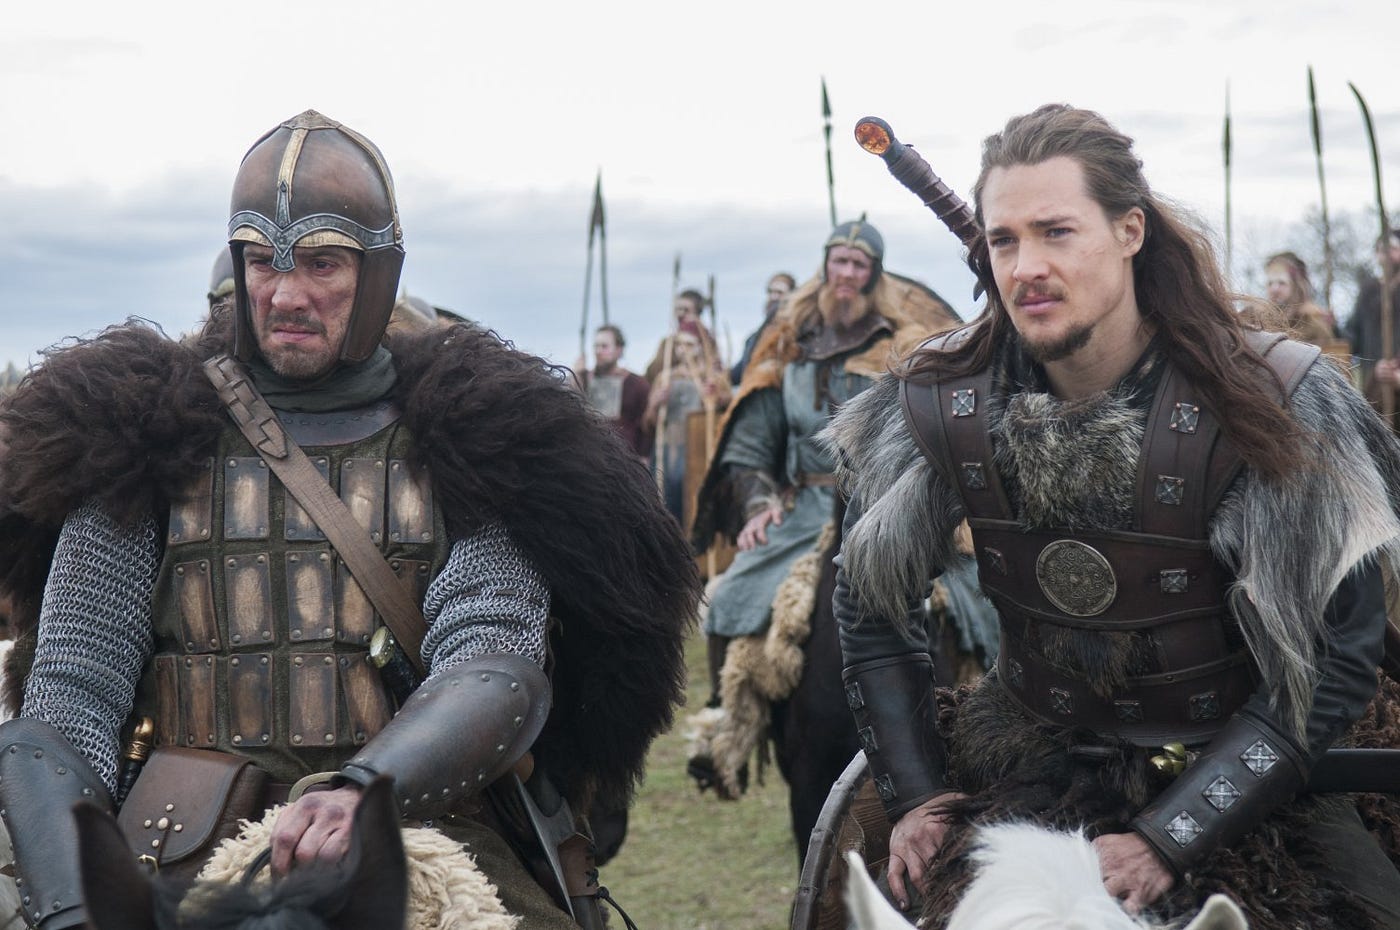 The Last Kingdom Author Is REALTED To The Real Life Uhtred.. 